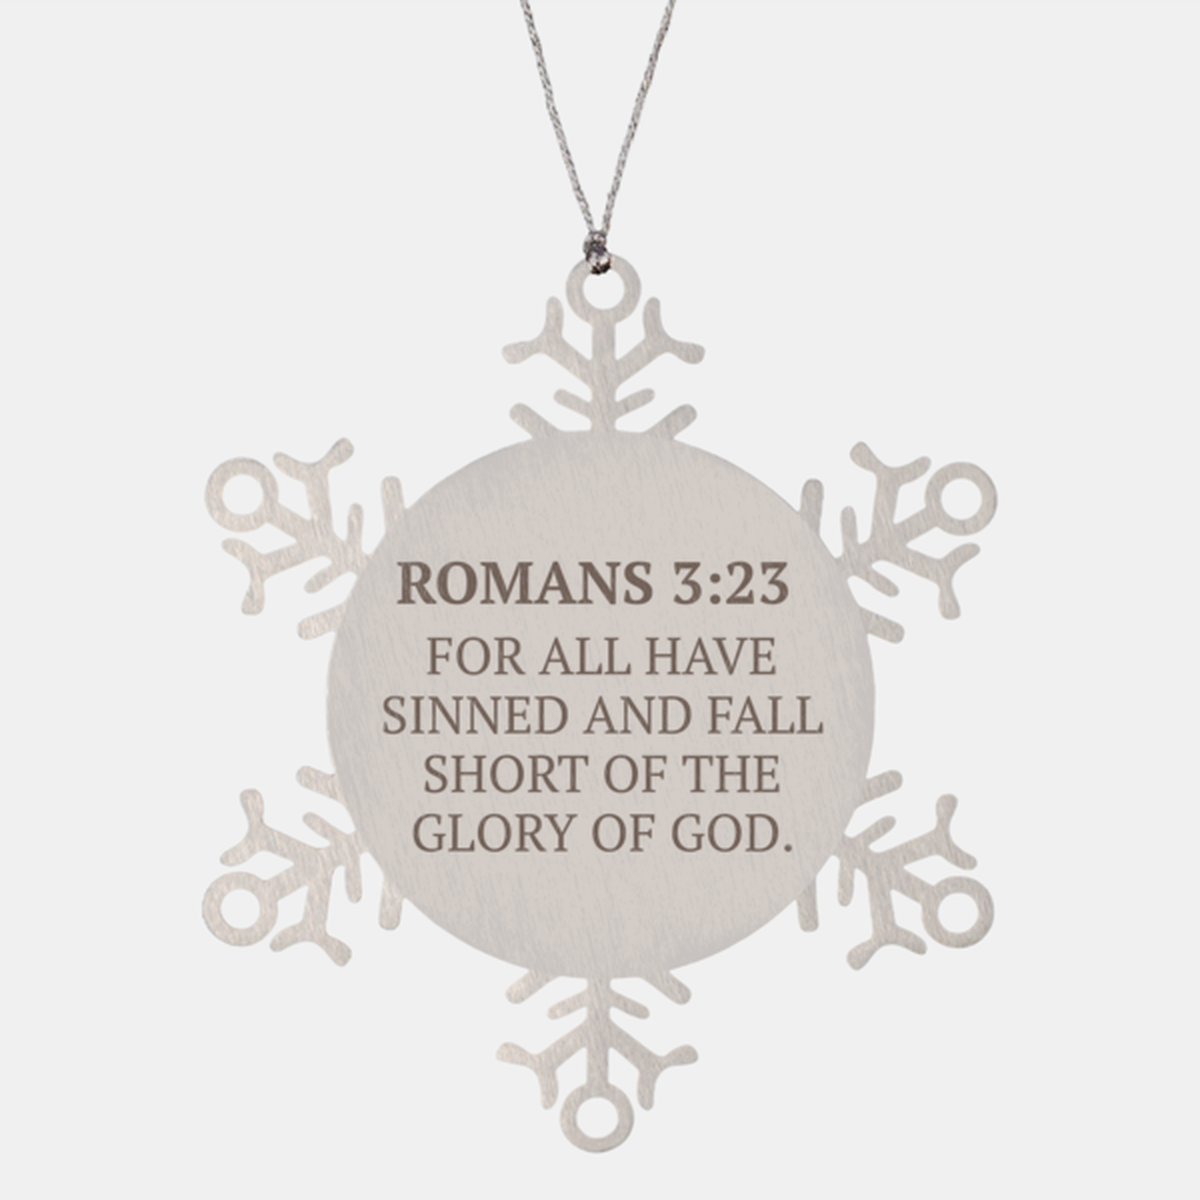 Christian Ornaments For Christmas Tree, For All Have Sinned And Fall Short Of The Glory Of God,, Religious Christmas Decorations, Scripture Ornaments Gifts, Bible Verse Ornament